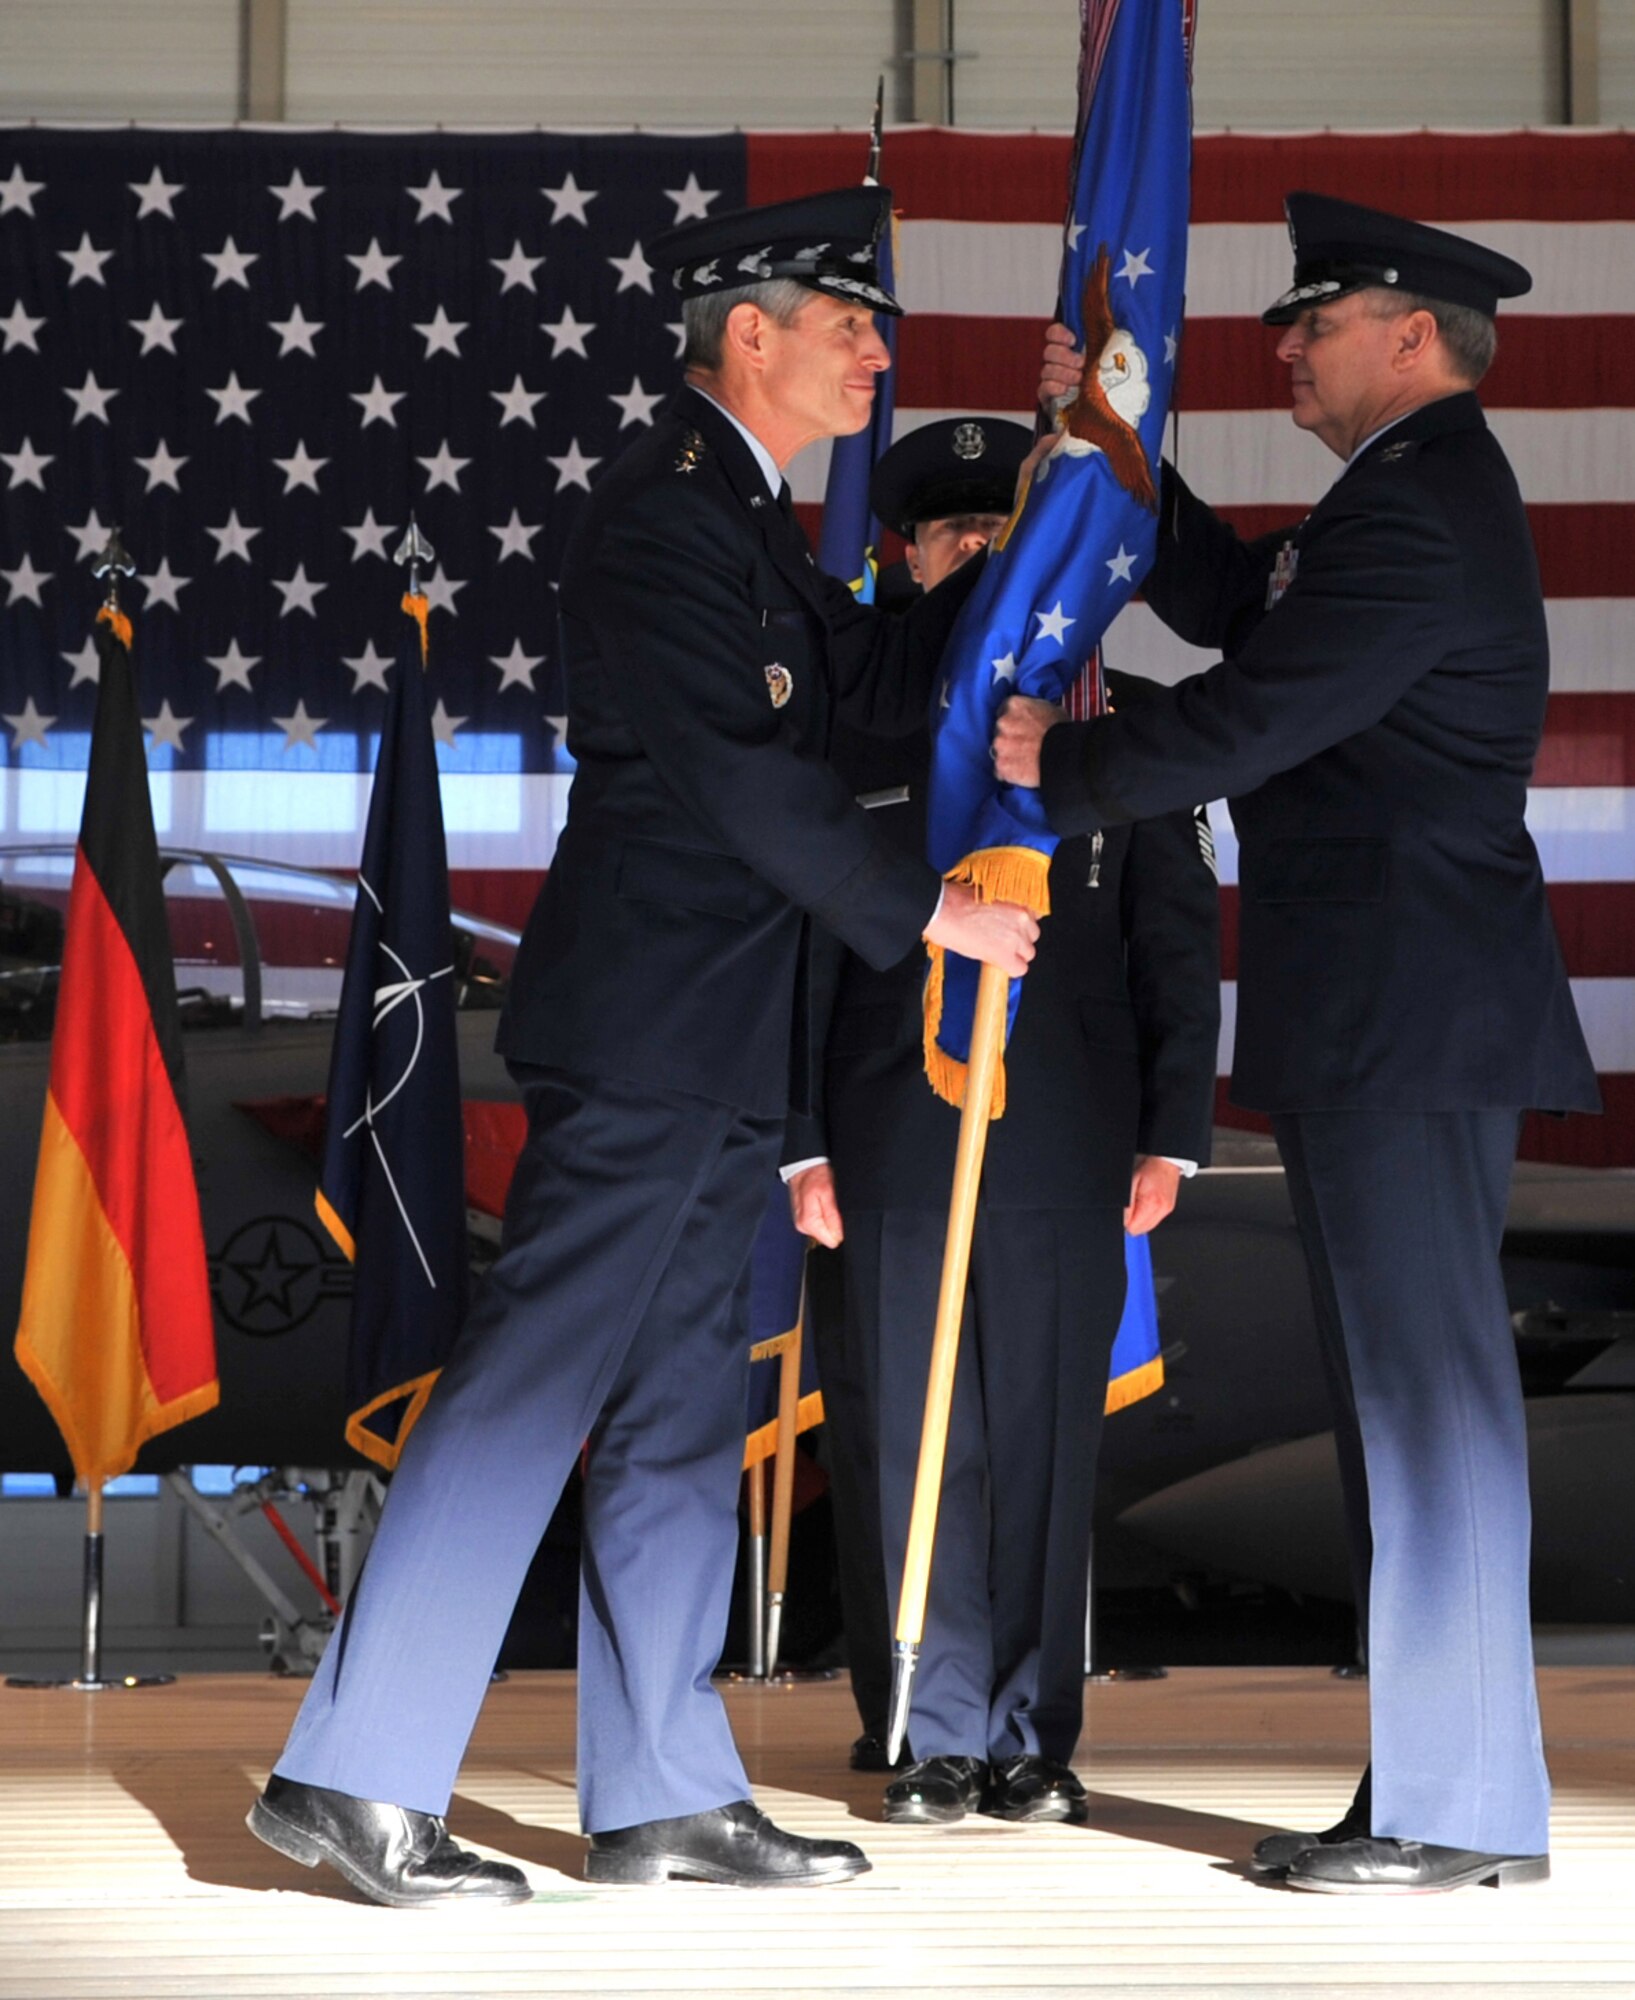 Air Force Chief of Staff Gen. Norton Schwartz gives Gen. Mark A. Welsh III, the command of U.S. Air Forces in Europe during a change of command ceremony, Ramstein Air Base, Germany, Dec. 13, 2010. Gen. Roger A. Brady, outgoing USAFE commander, relinquished command during the change of command ceremony after providing command and control for air, space and missile defense for activities in an area of operations covering almost one-fifth of the globe which included 51 countries in Europe, Asia, the Middle East, and the Arctic and Atlantic oceans. (U.S. Air Force photo by Senior Airman Caleb Pierce)